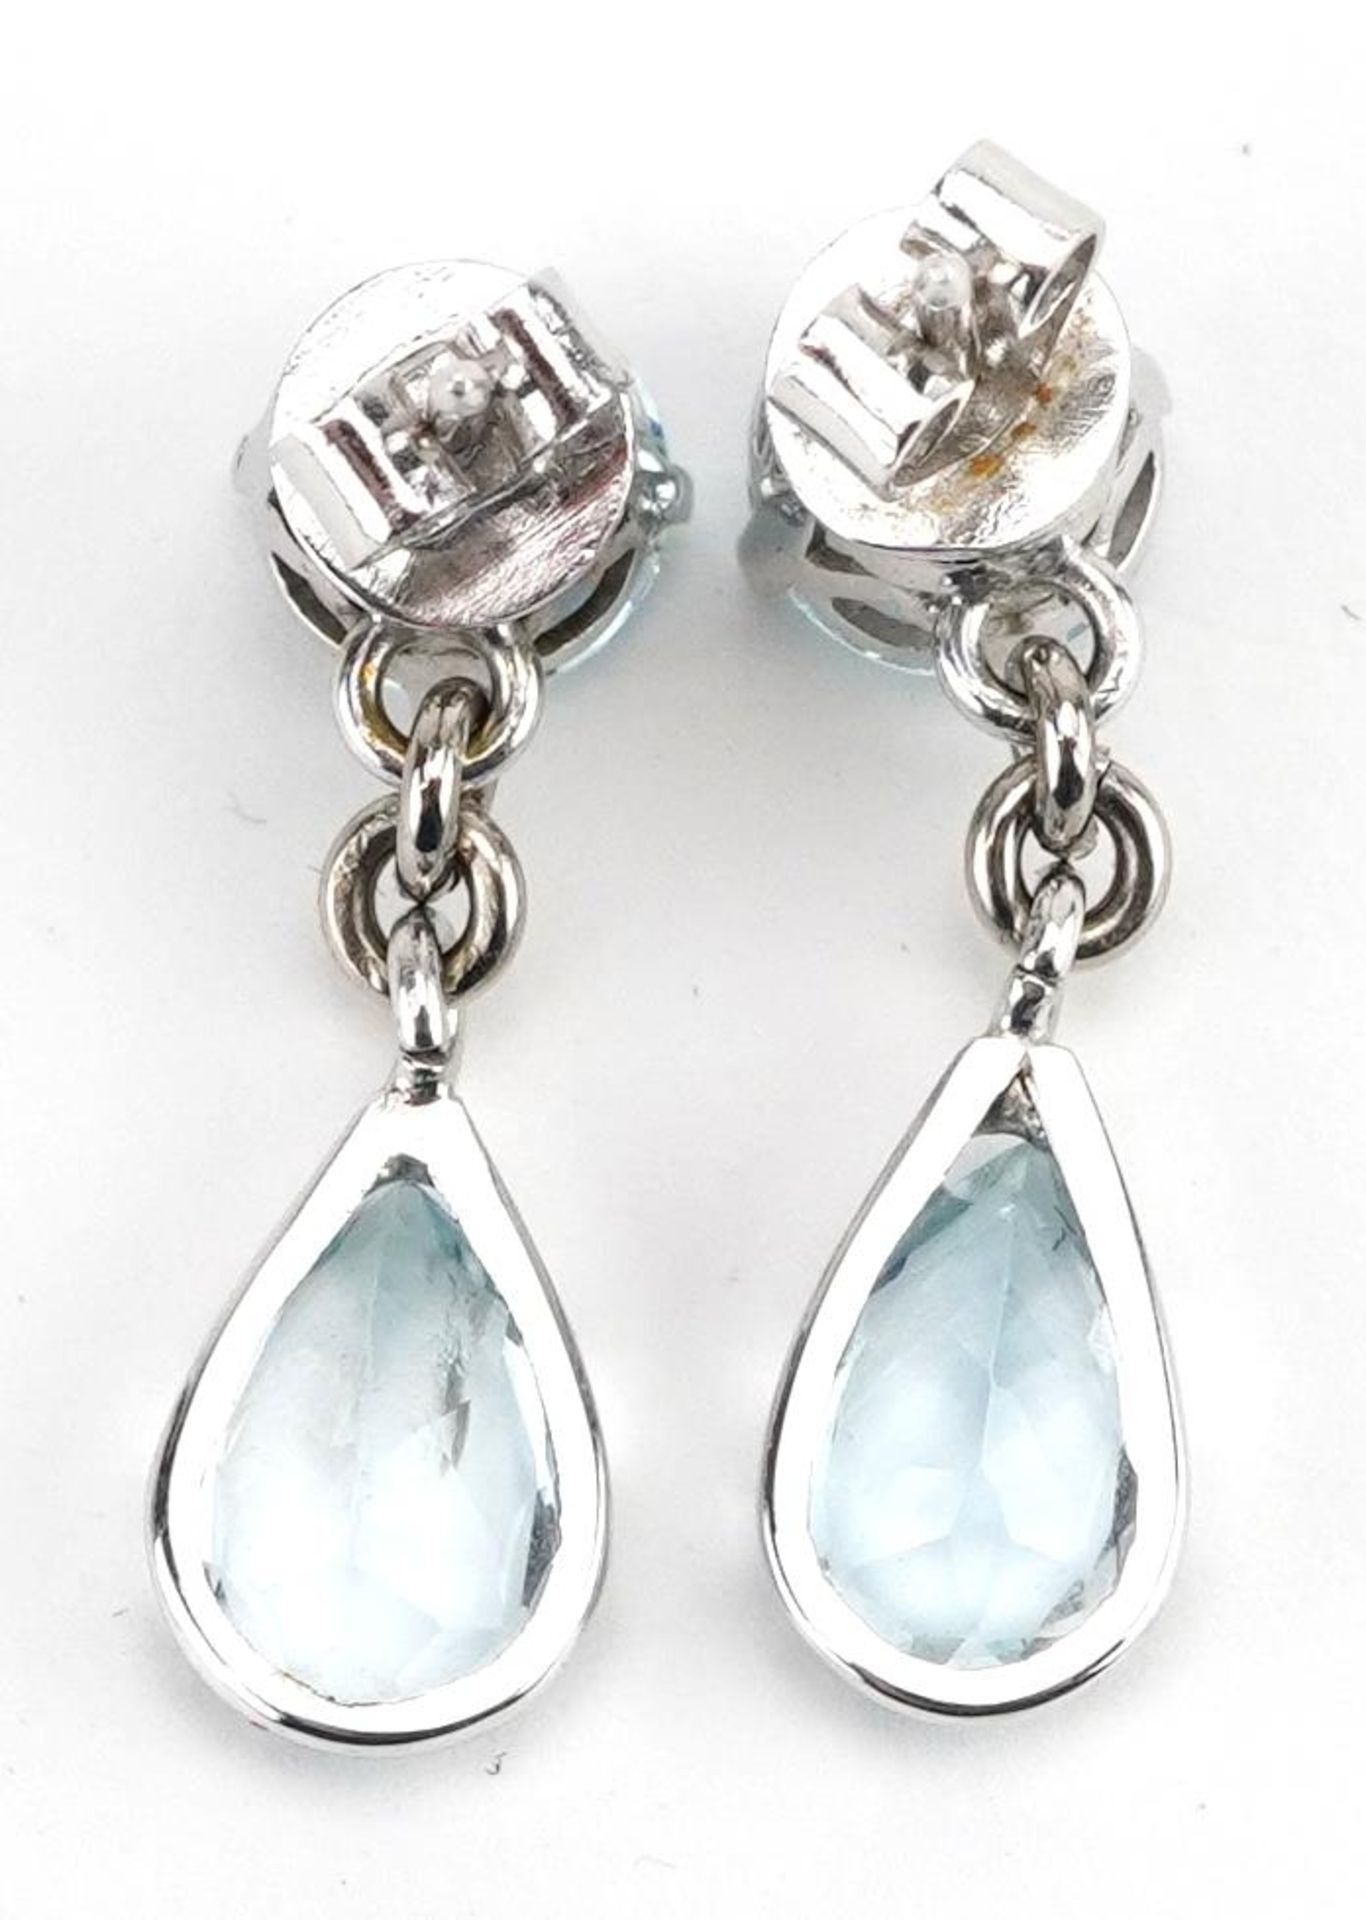 Pair of unmarked white gold aquamarine teardrop earrings, the butterflies marked 14k, 2.4cm high, - Image 2 of 2